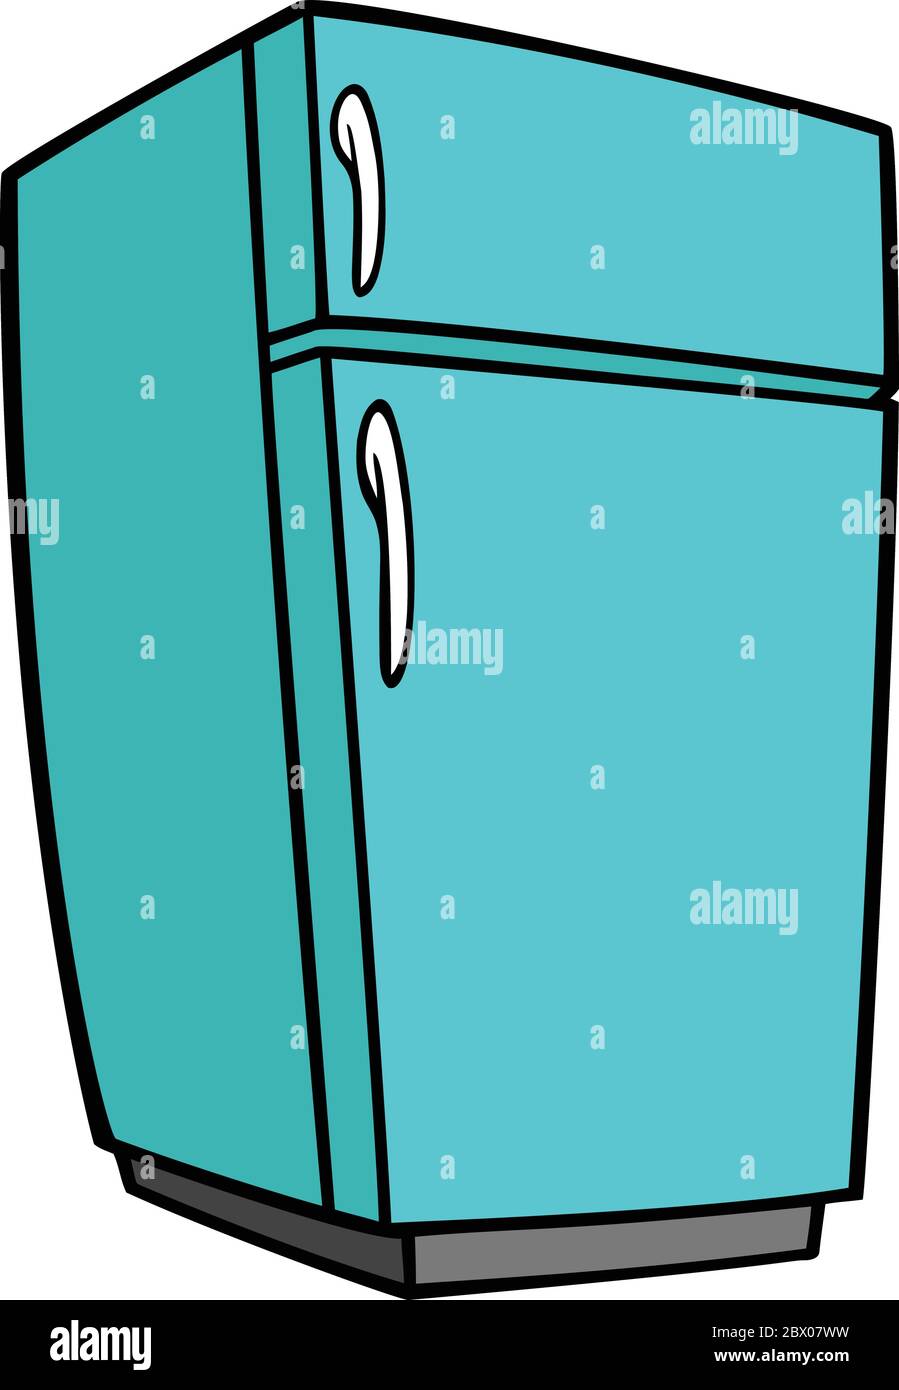 Teal Retro Refrigerator - An illustration of a Teal Retro Refrigerator. Stock Vector